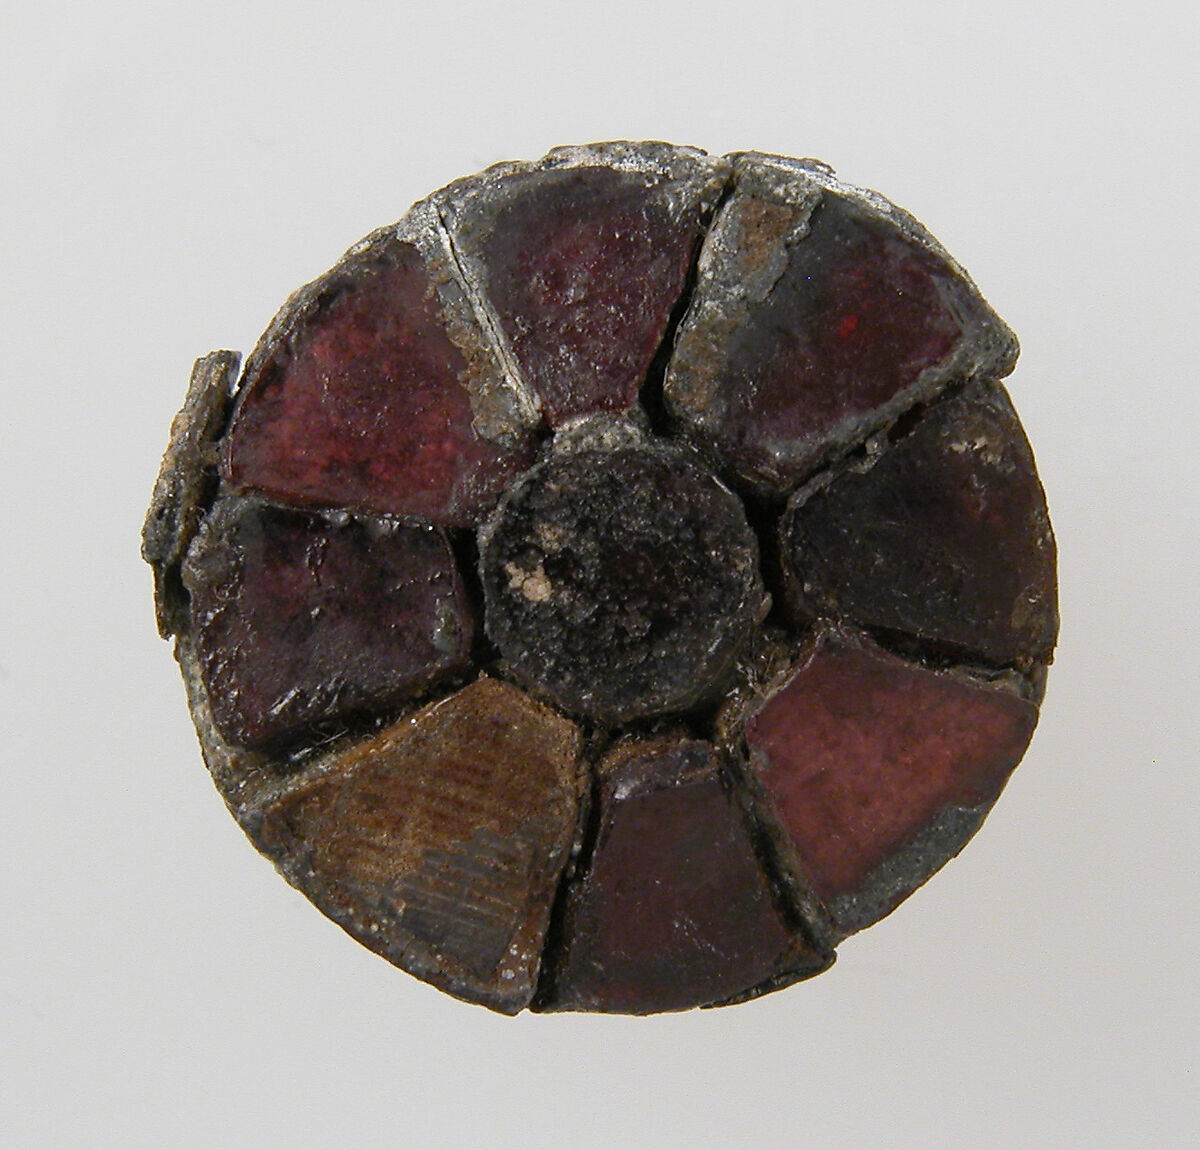 Disk Brooch, Silver, glass paste, remnant of iron pin, metal foil, Frankish 